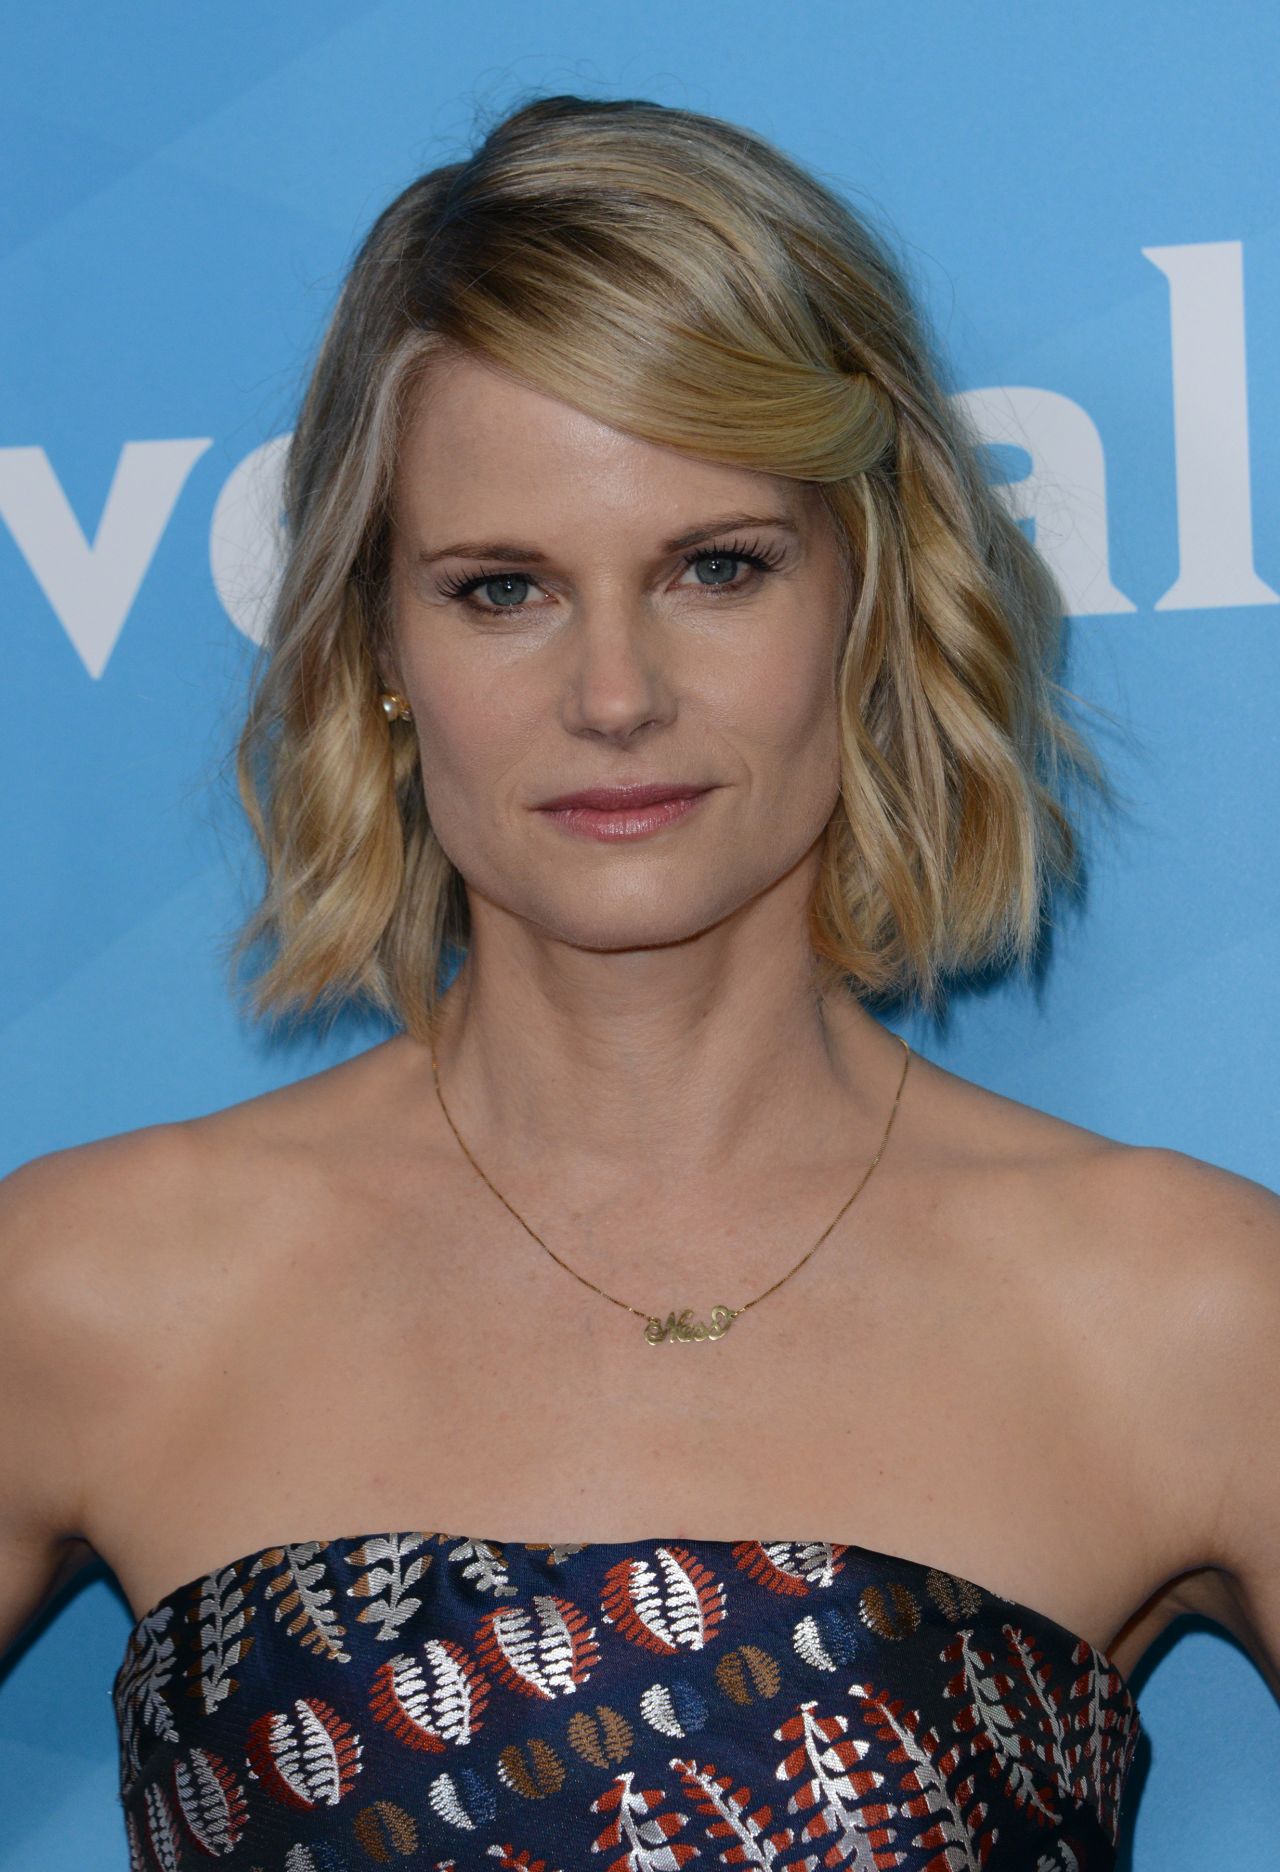 joelle-carter-nbcuniversal-summer-press-day-in-beverly-hills-3-20-2017-7.